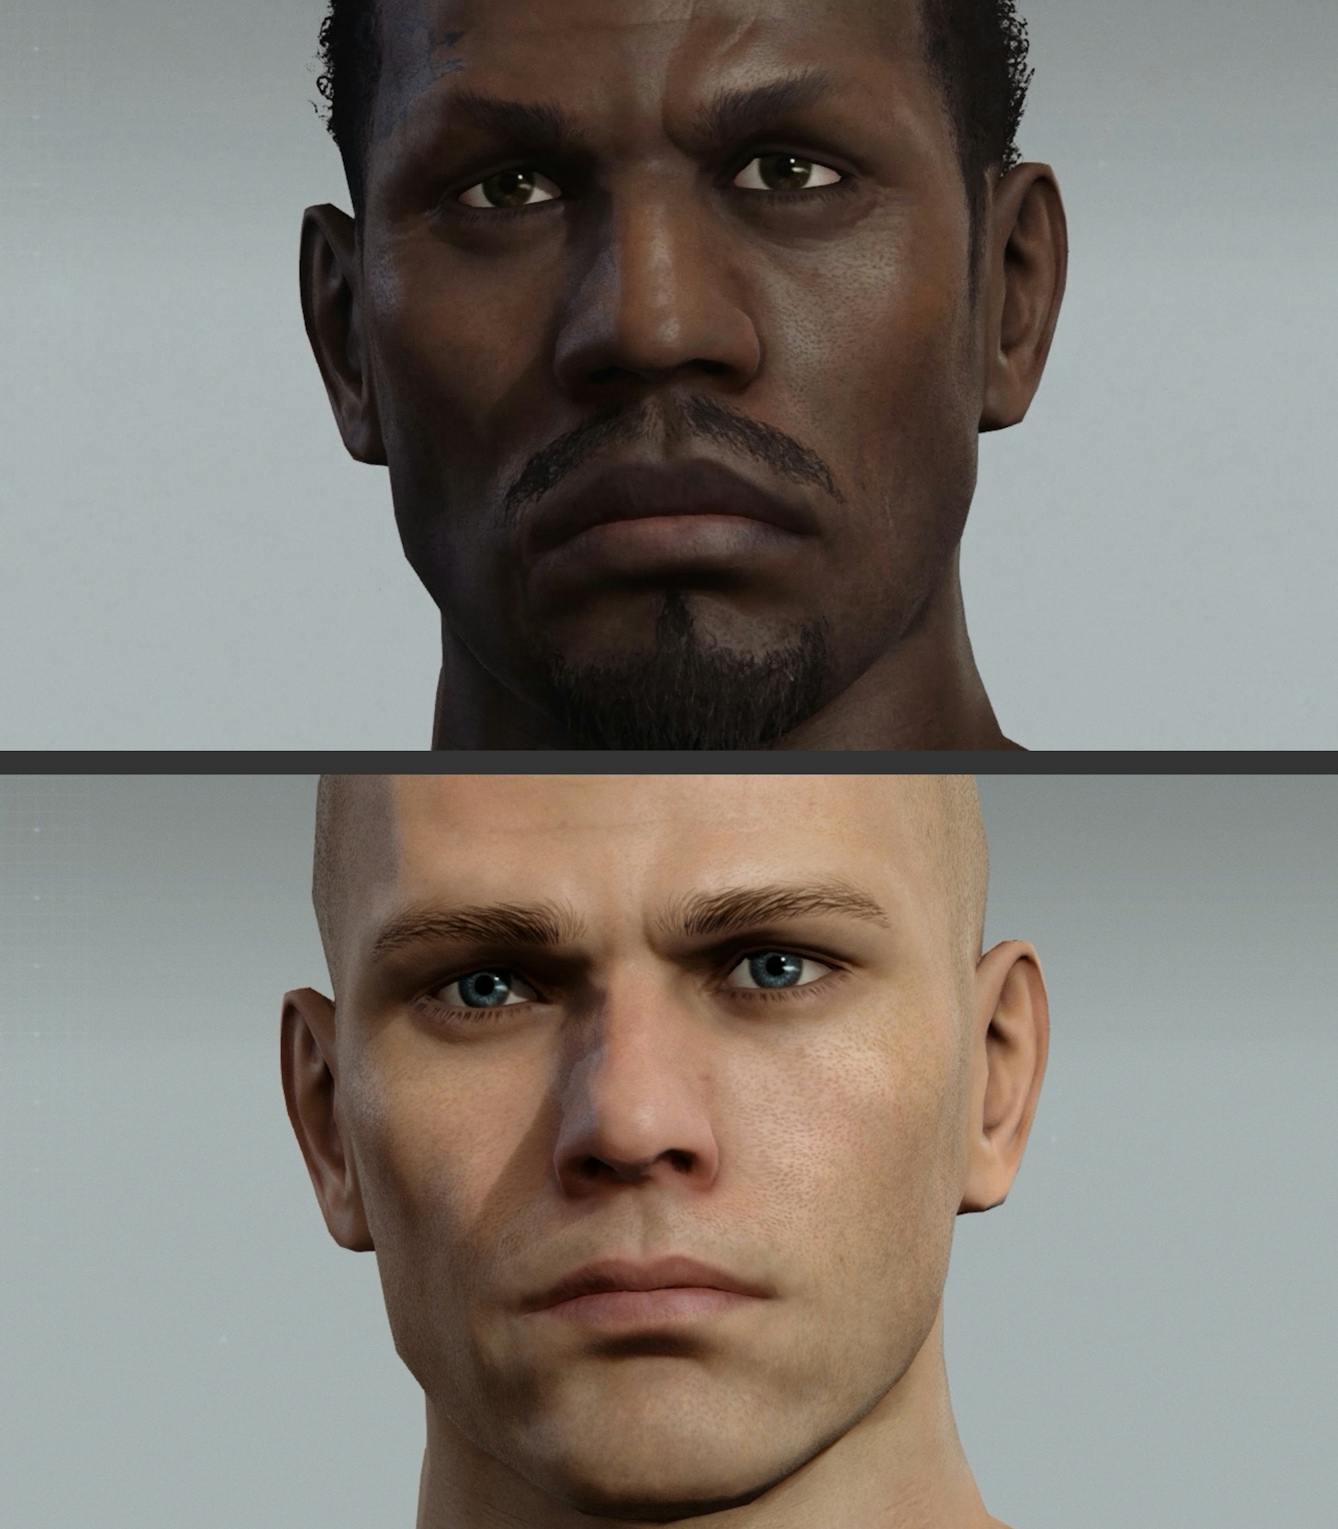 Vertical diptych of two computer generated avatars created as part of video gameplay. The avatar on the top shows a Black man with short hair and facial hair staring to camera. The avatar on the bottom Shows a white man with a shaved head and beard, also looking to camera. Both avatars' heads fill the frame, copped at the mid-forehead and just below the chin. Behind each head is a plain grey background.